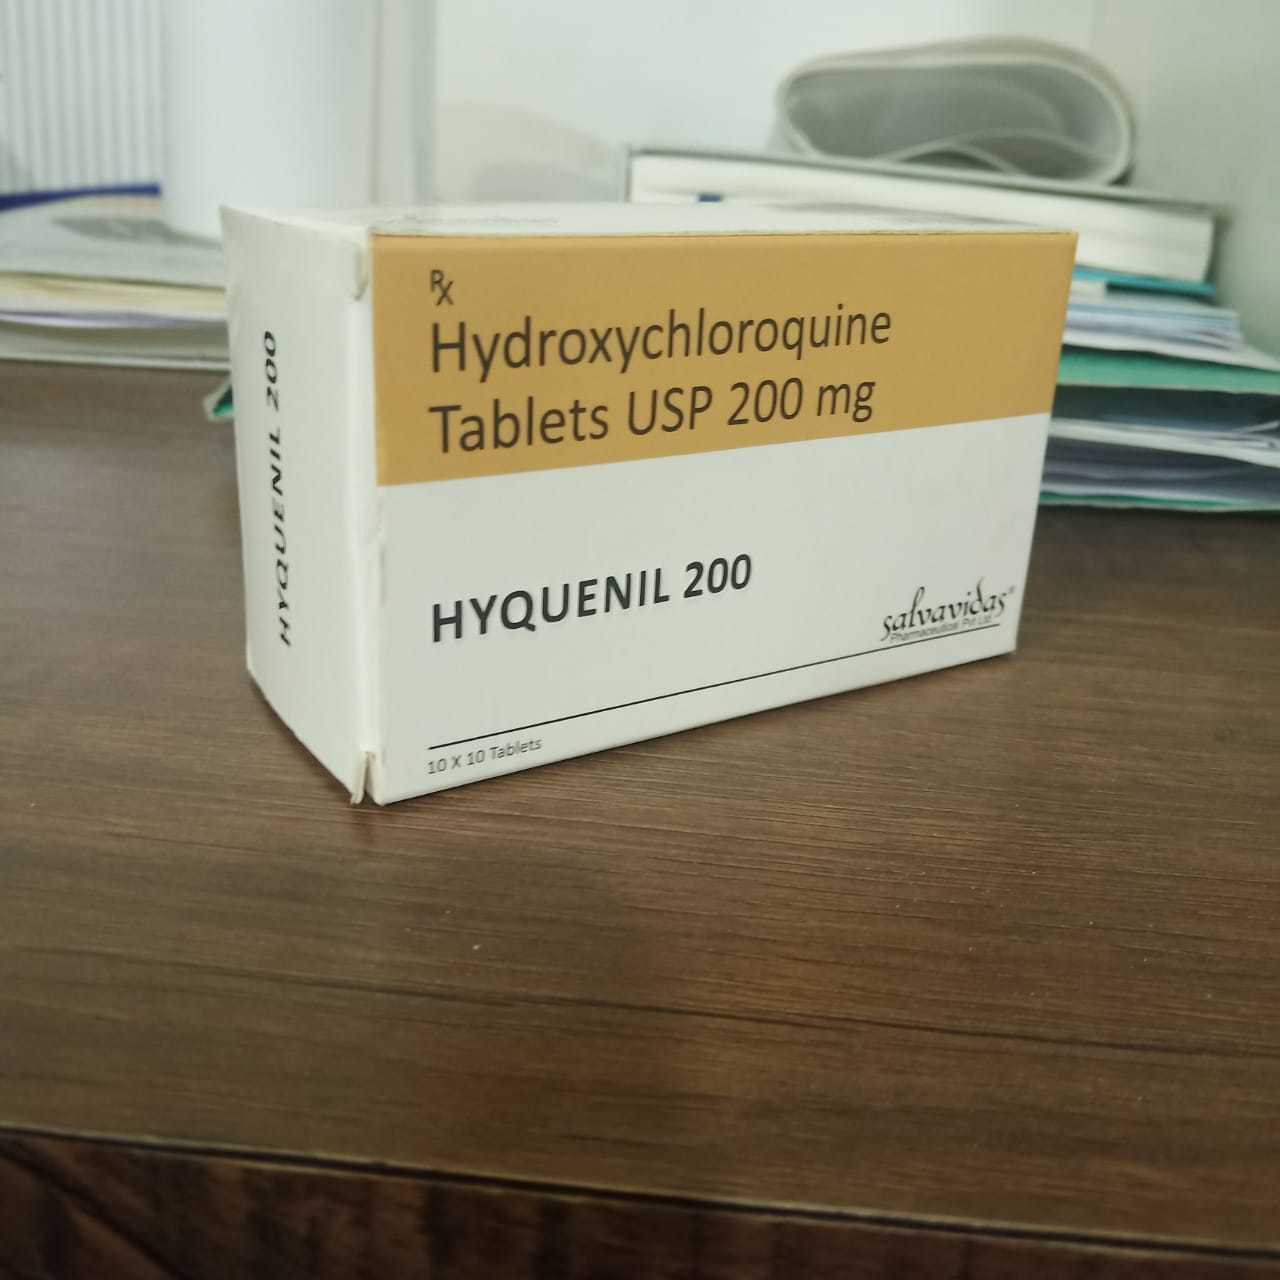 HYQUENIL 200 Tablets